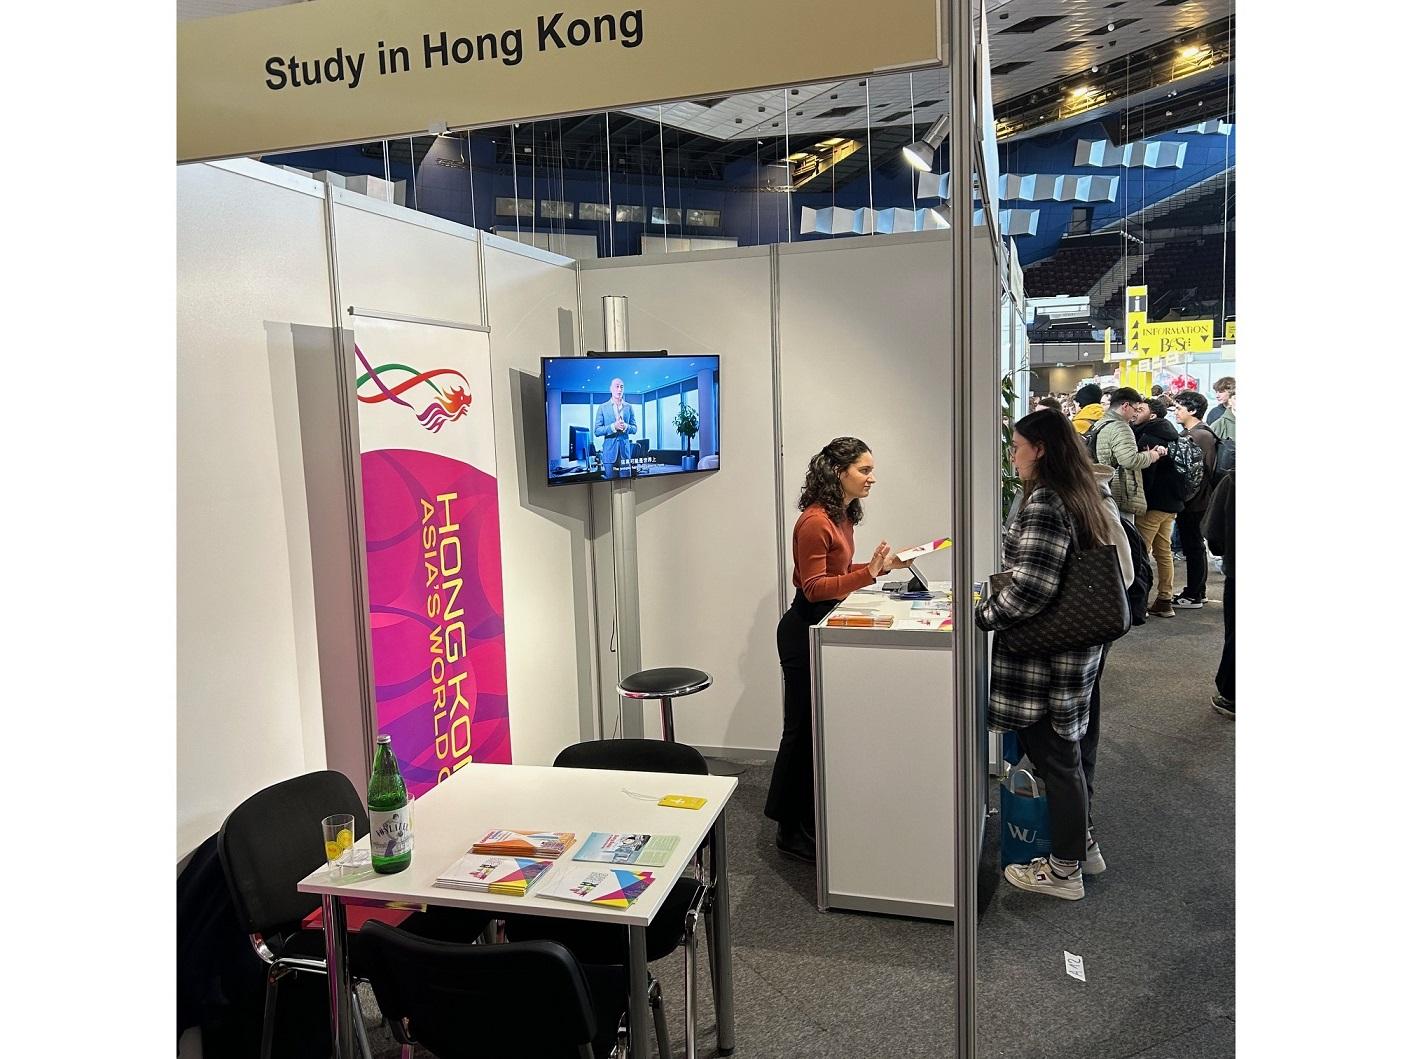 The Hong Kong Economic and Trade Office, Berlin hosted a booth at the Austrian education fair BeSt Vienna, which ran from March 7 to 10 (Vienna time), to introduce study opportunities in Hong Kong.